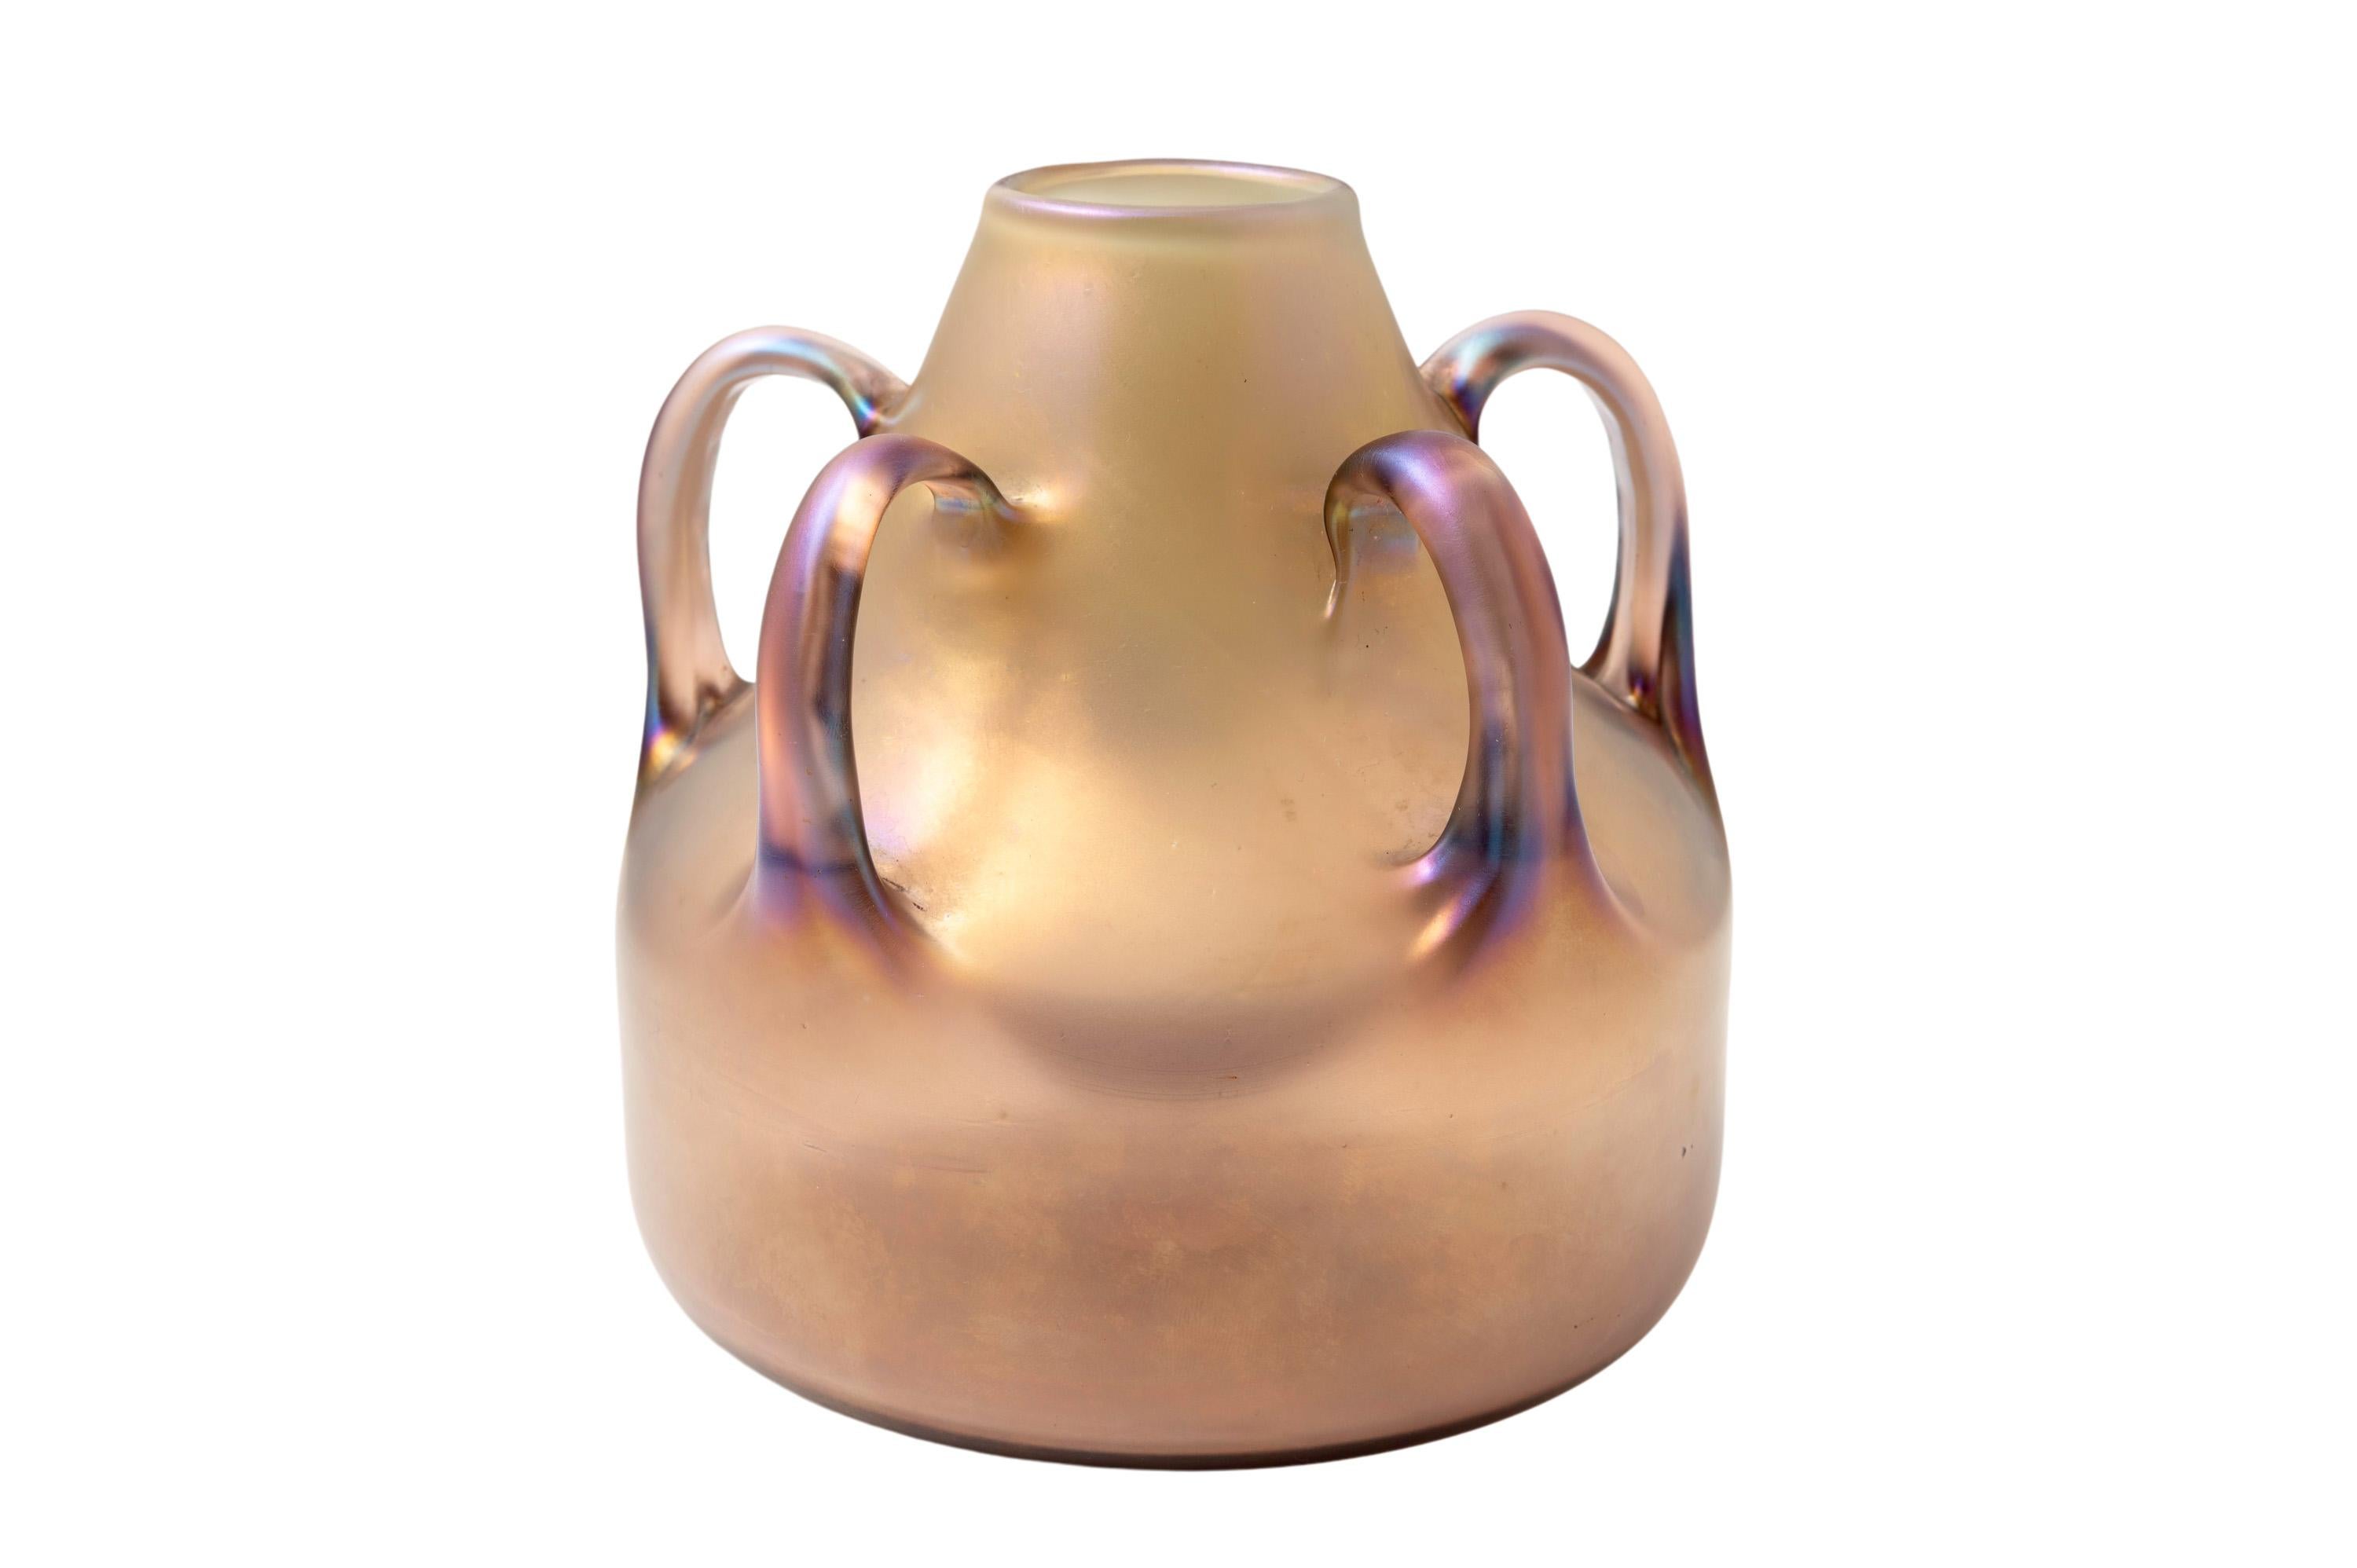 Vase, Koloman Moser, Johann Loetz Witwe for E. Bakalowits' Söhne, Violetta decoration, 1903

Among the most important glass objects from the Lötz manufactory are undoubtedly those from the series created in cooperation with E. Bakalowits Söhne. As a